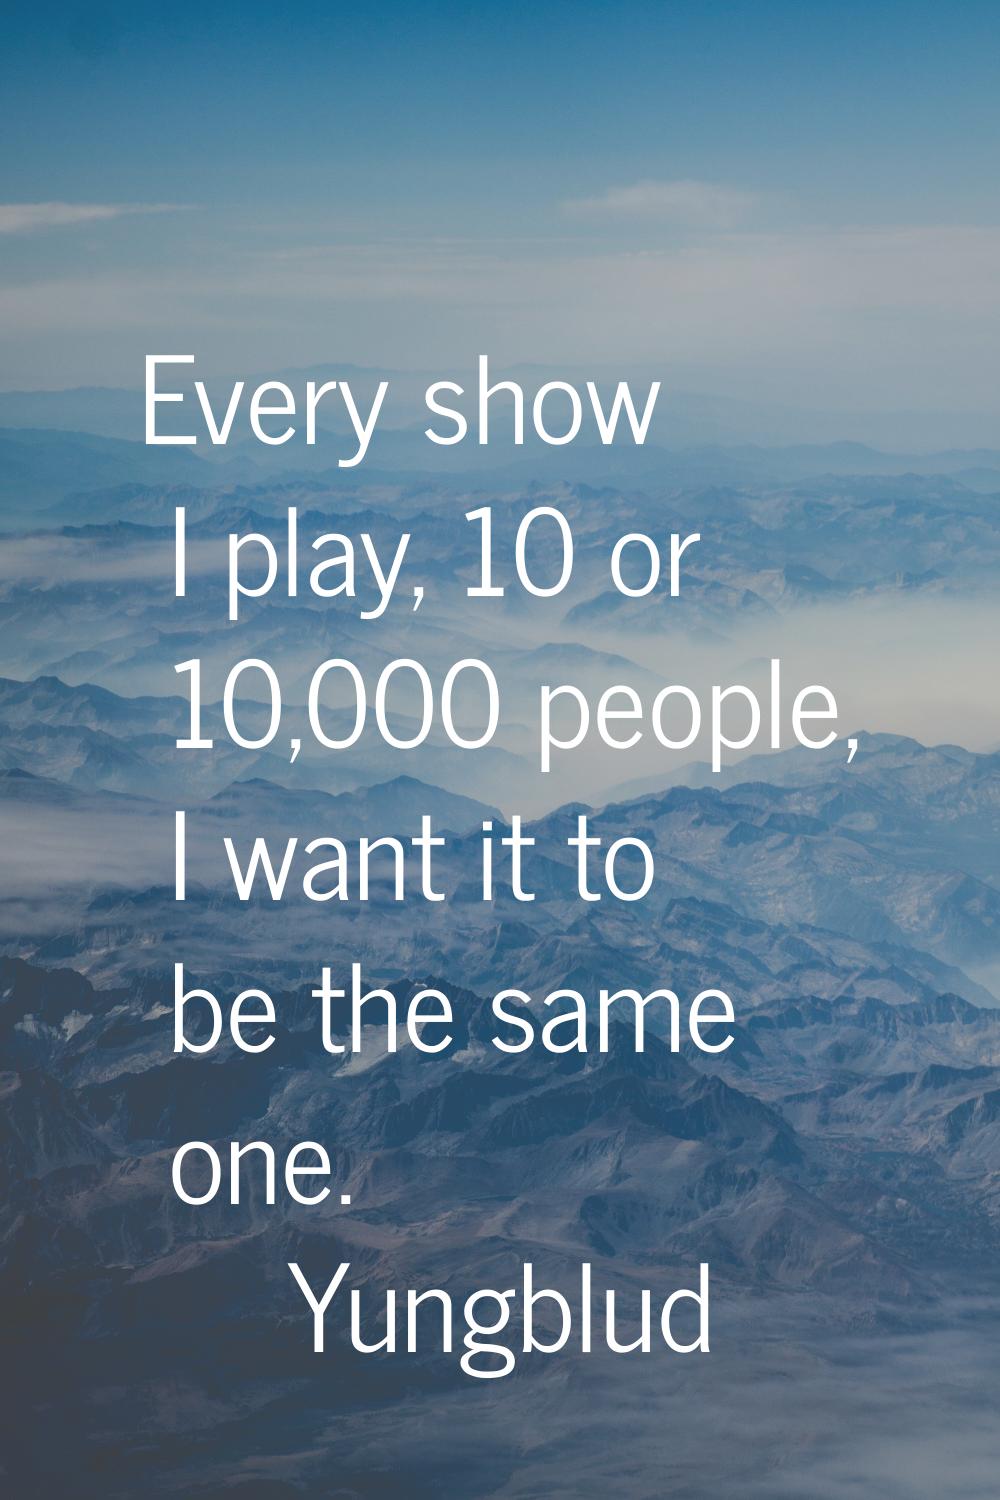 Every show I play, 10 or 10,000 people, I want it to be the same one.